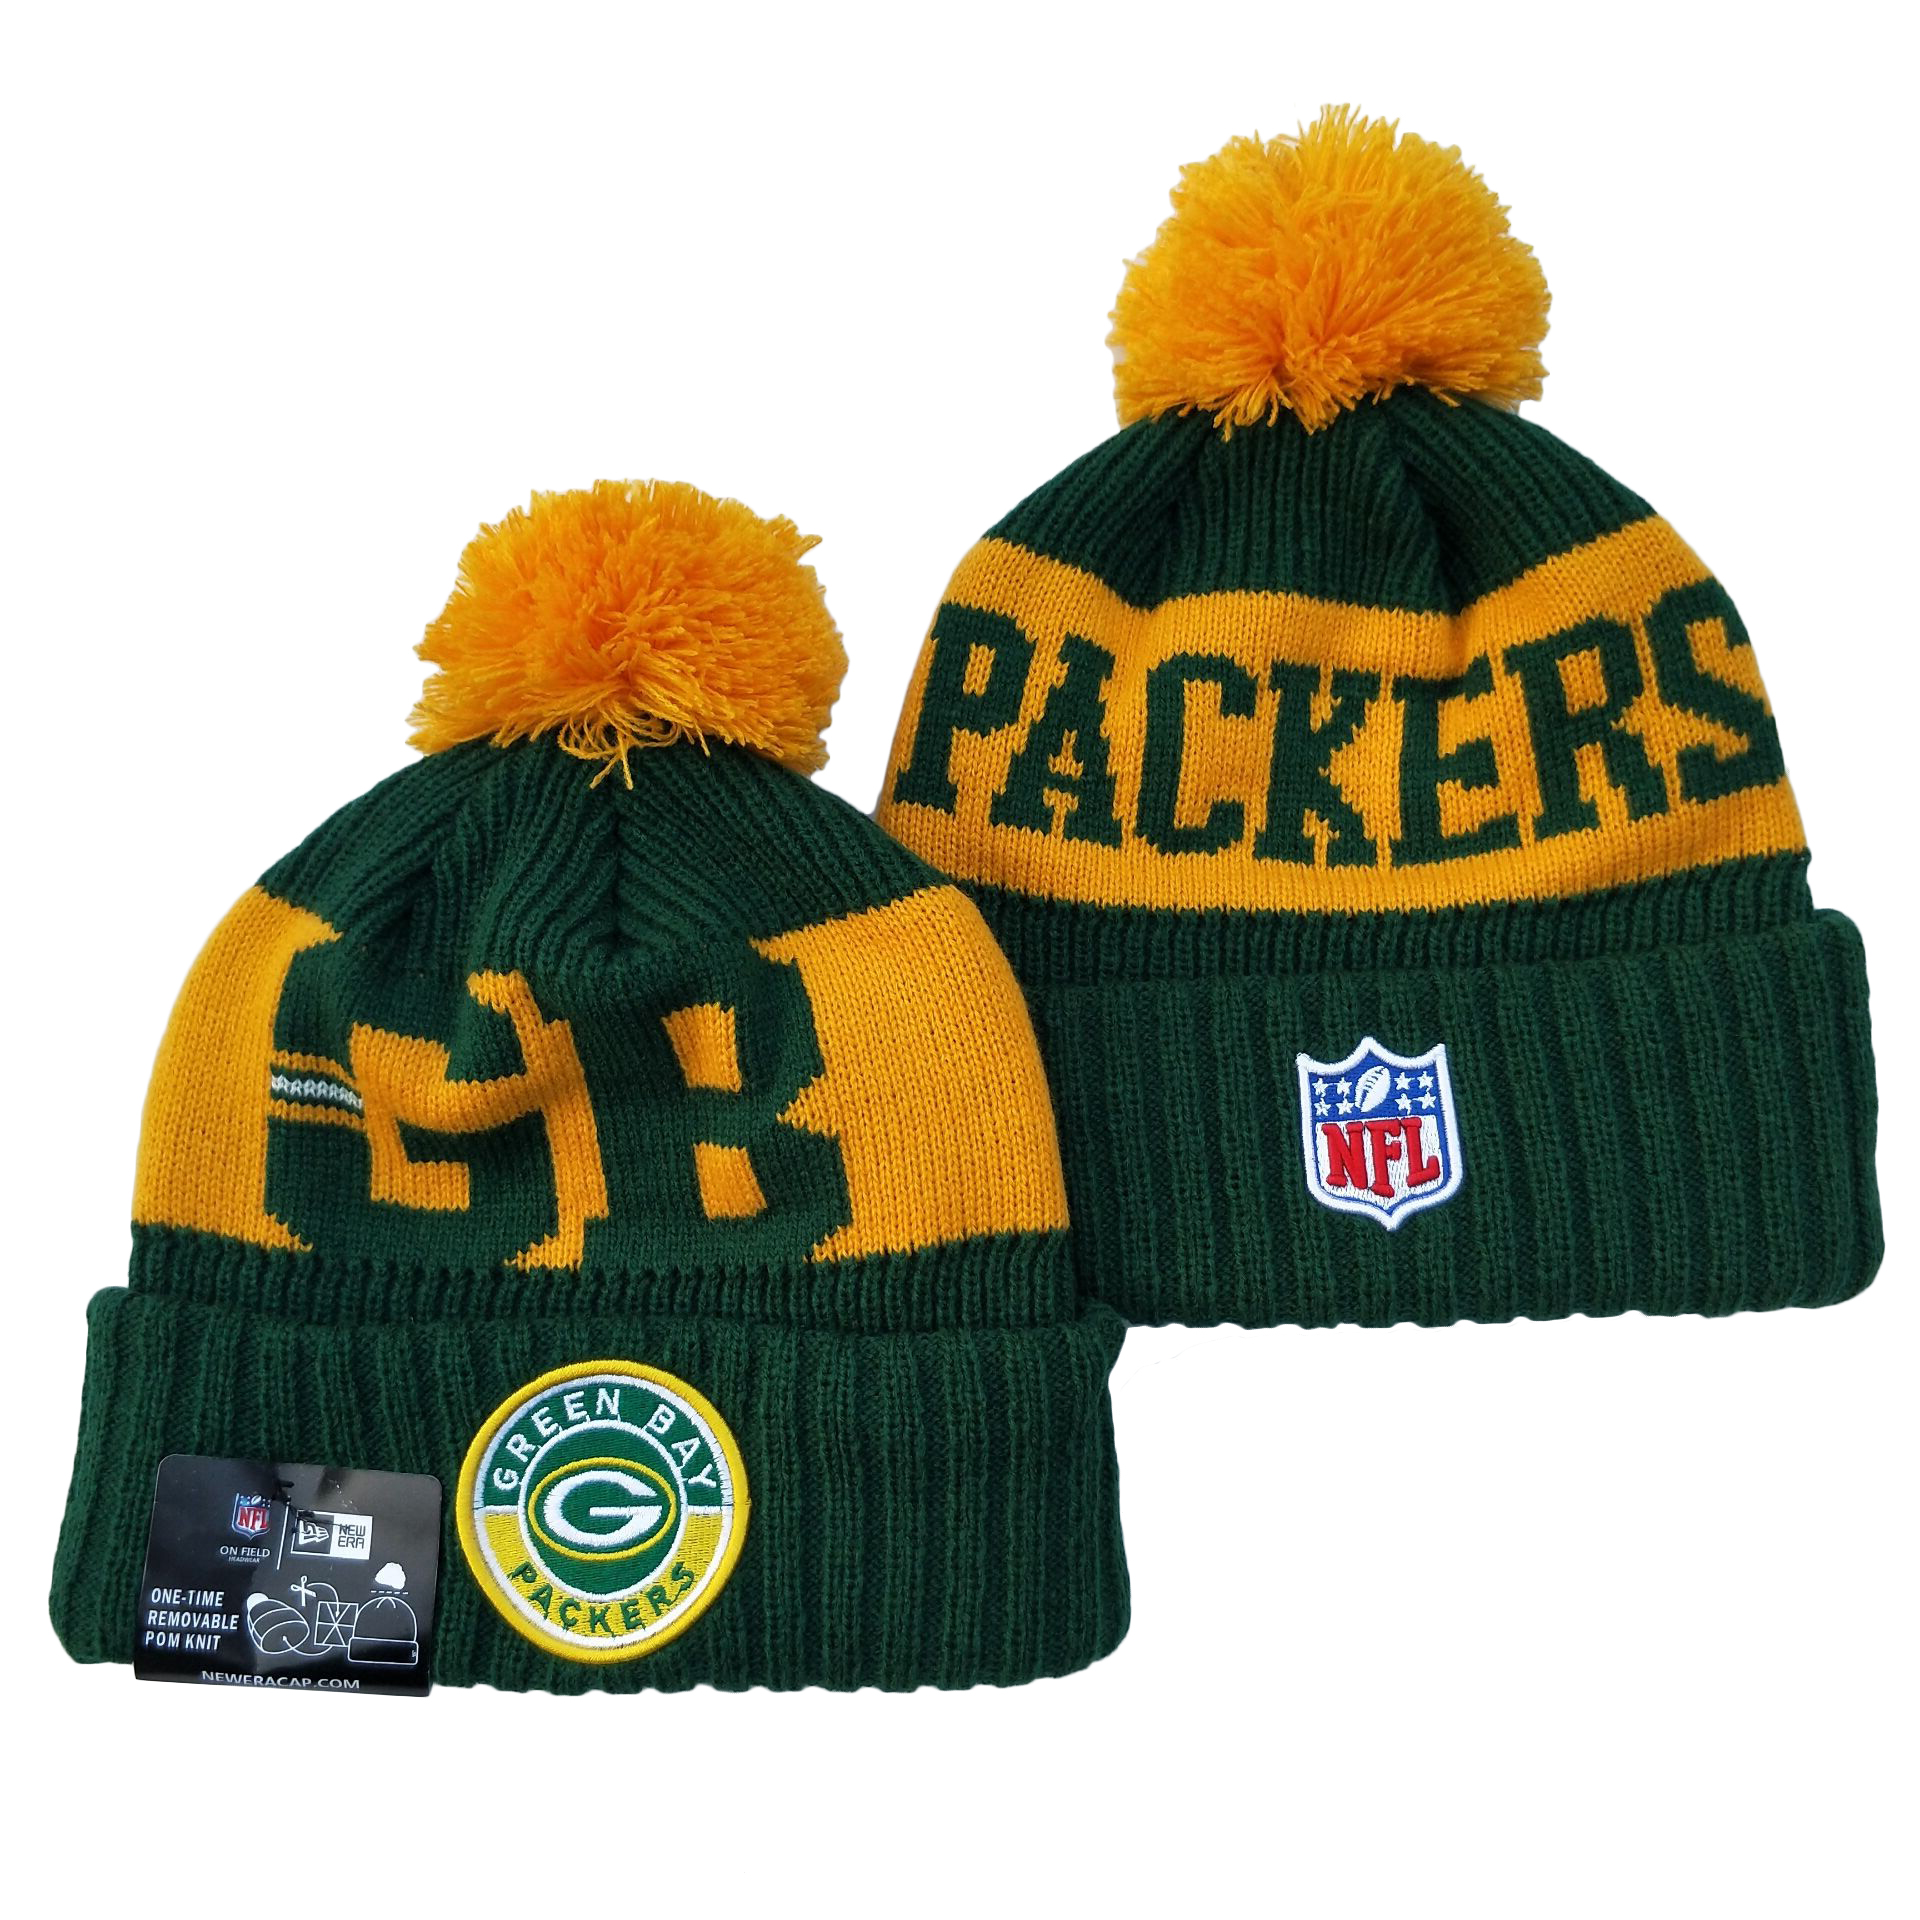 Green Bay Packers knit Hats 085